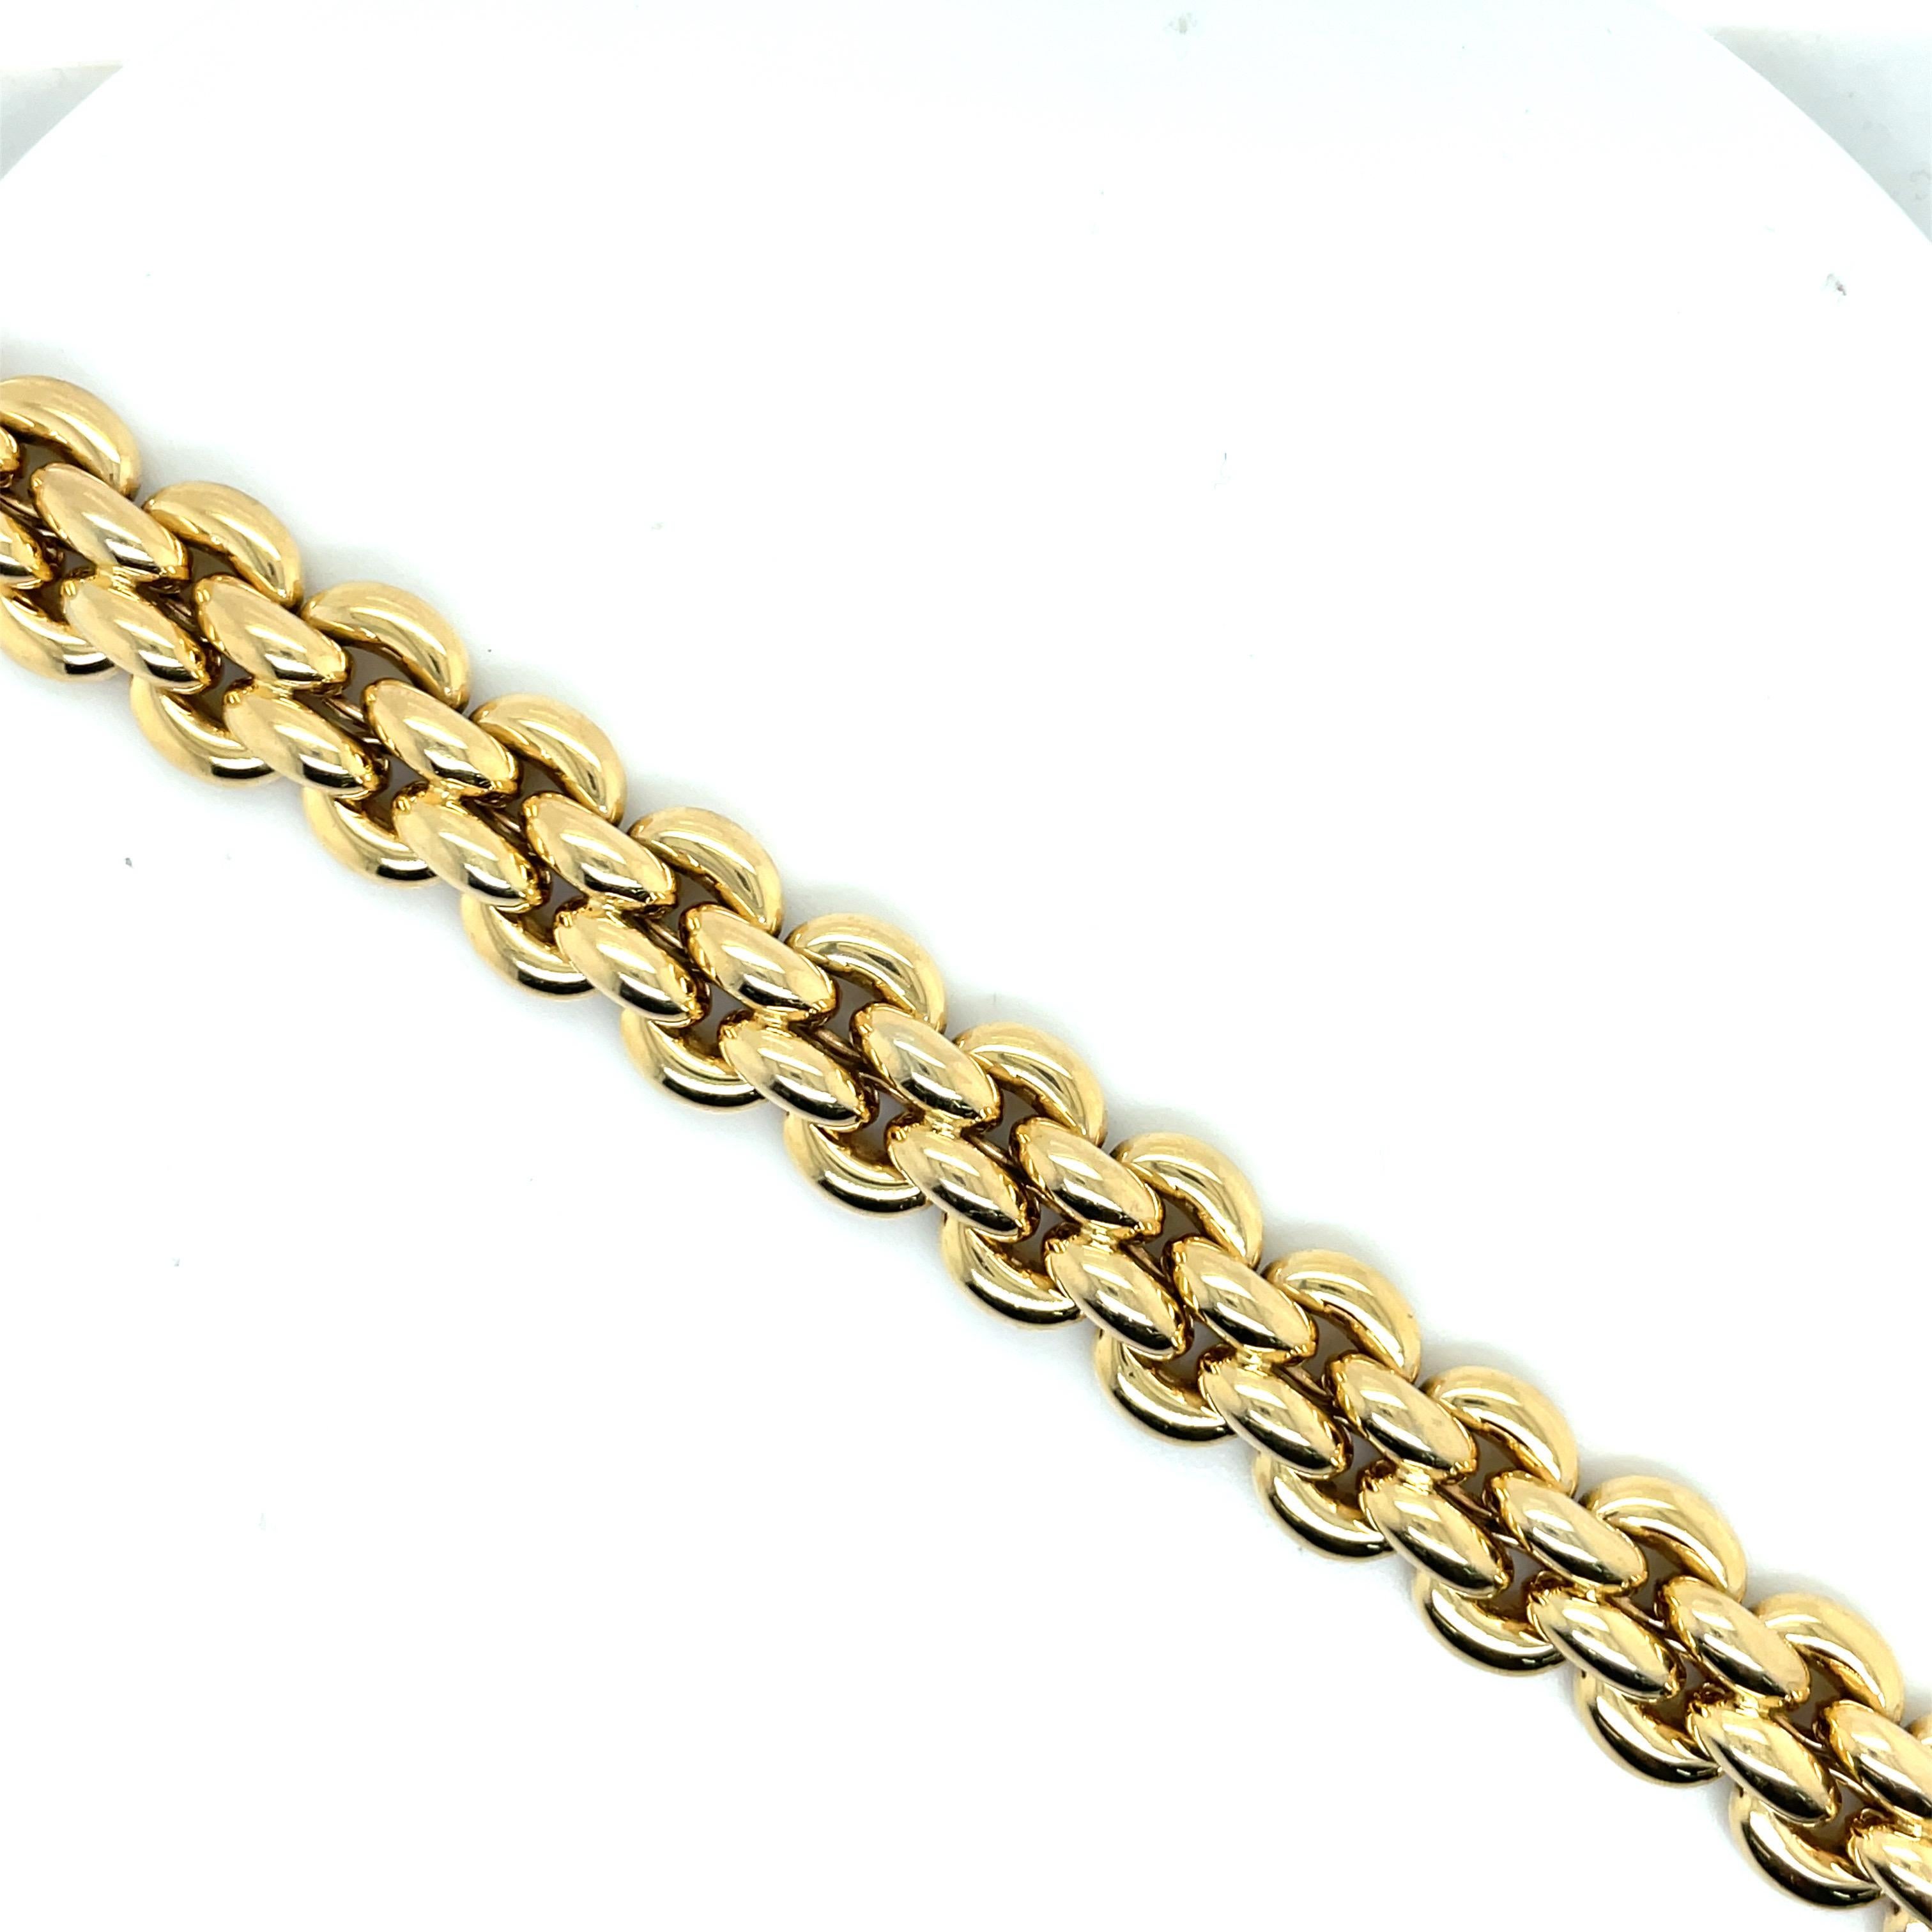 18 Karat Yellow Gold four row link bracelet weighing 42.2 Grams. Made in Italy
Stamped 
NANIS 
1750VI 
750 
ITALY 